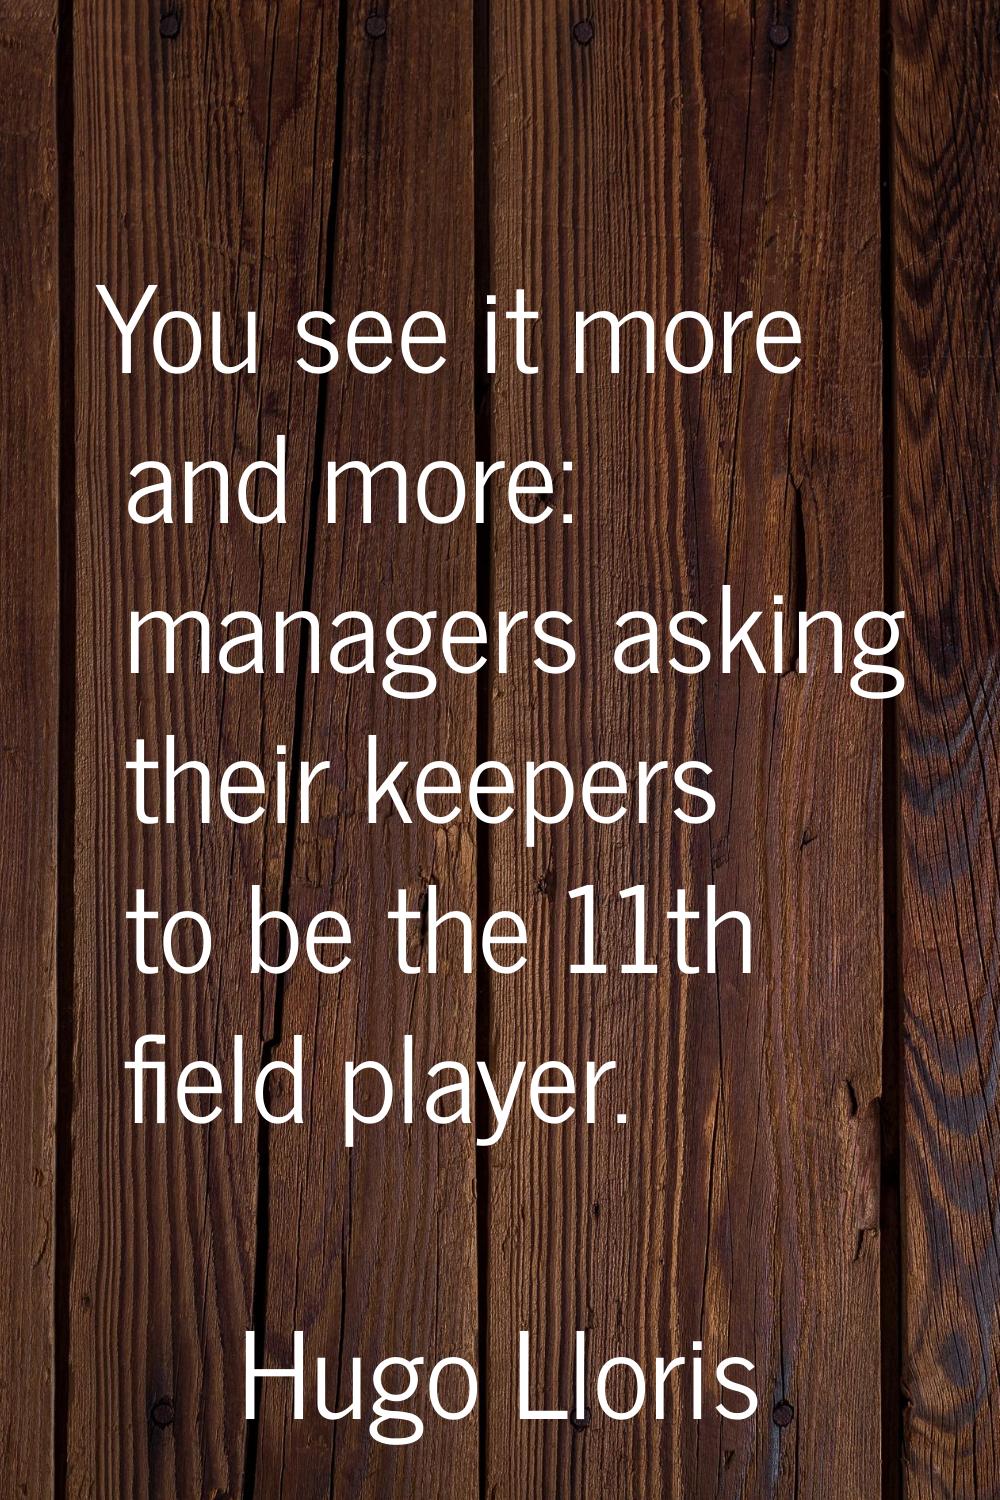 You see it more and more: managers asking their keepers to be the 11th field player.